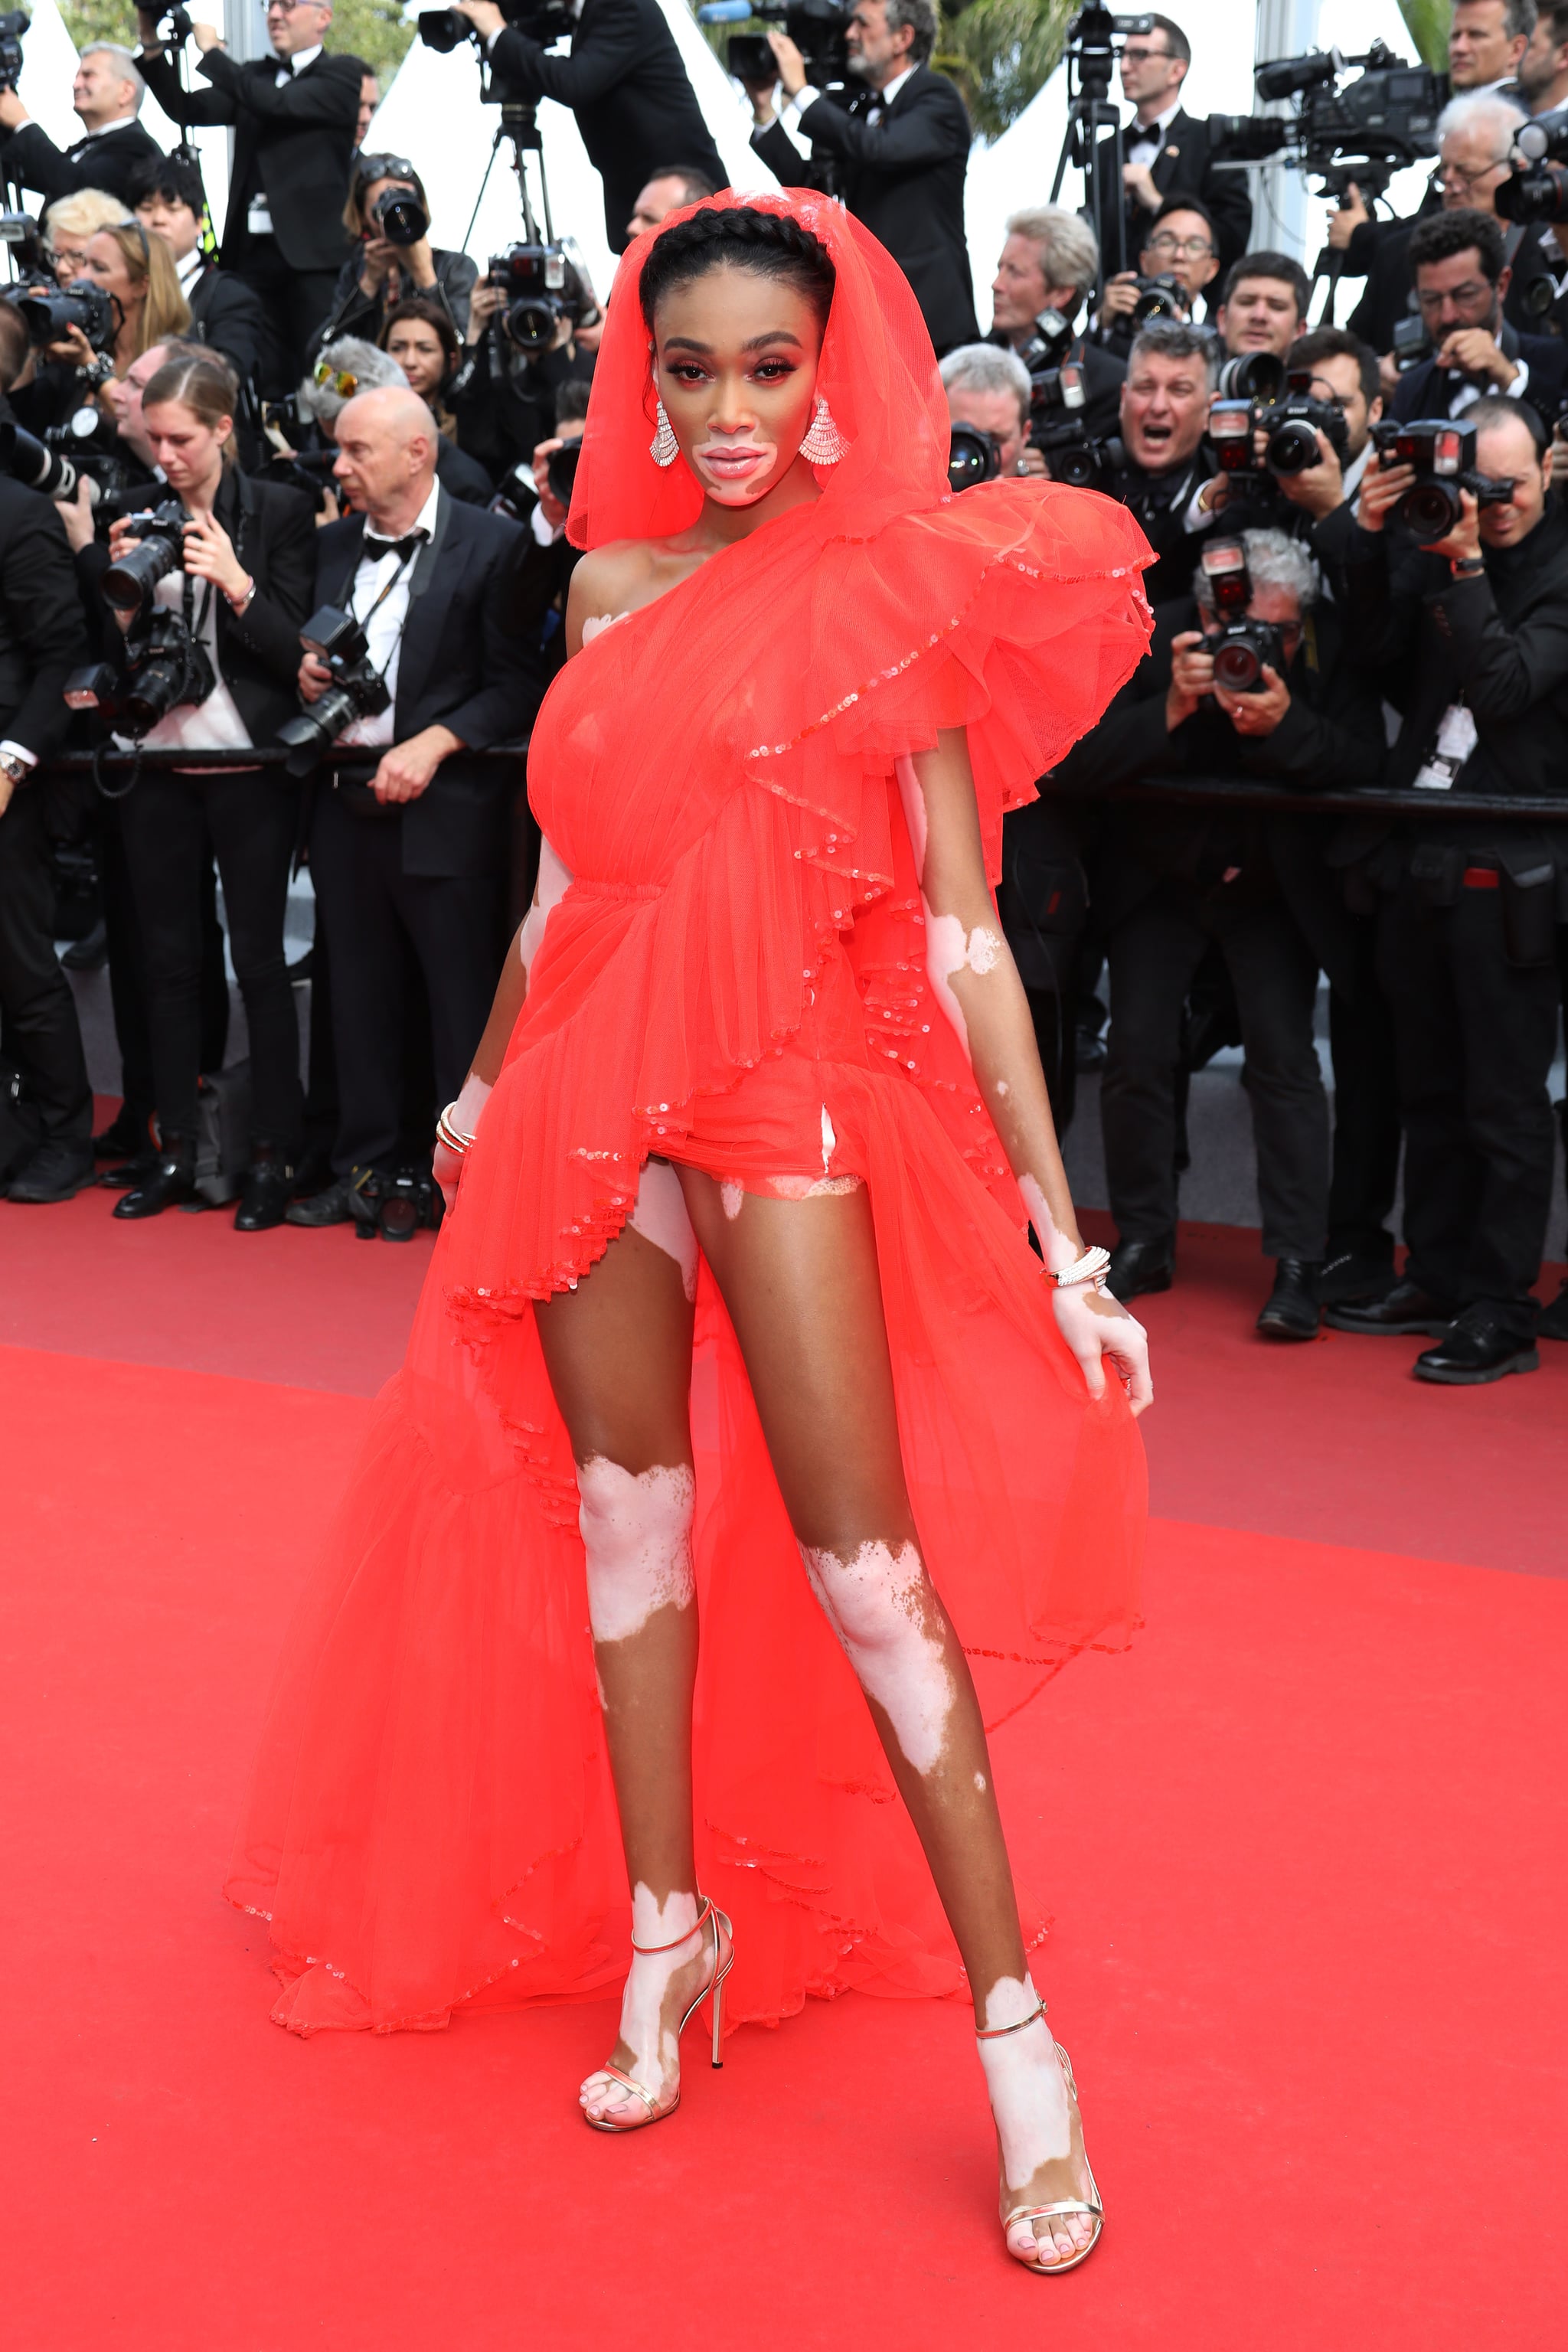 Winnie Harlow at the 2019 Cannes Film Festival